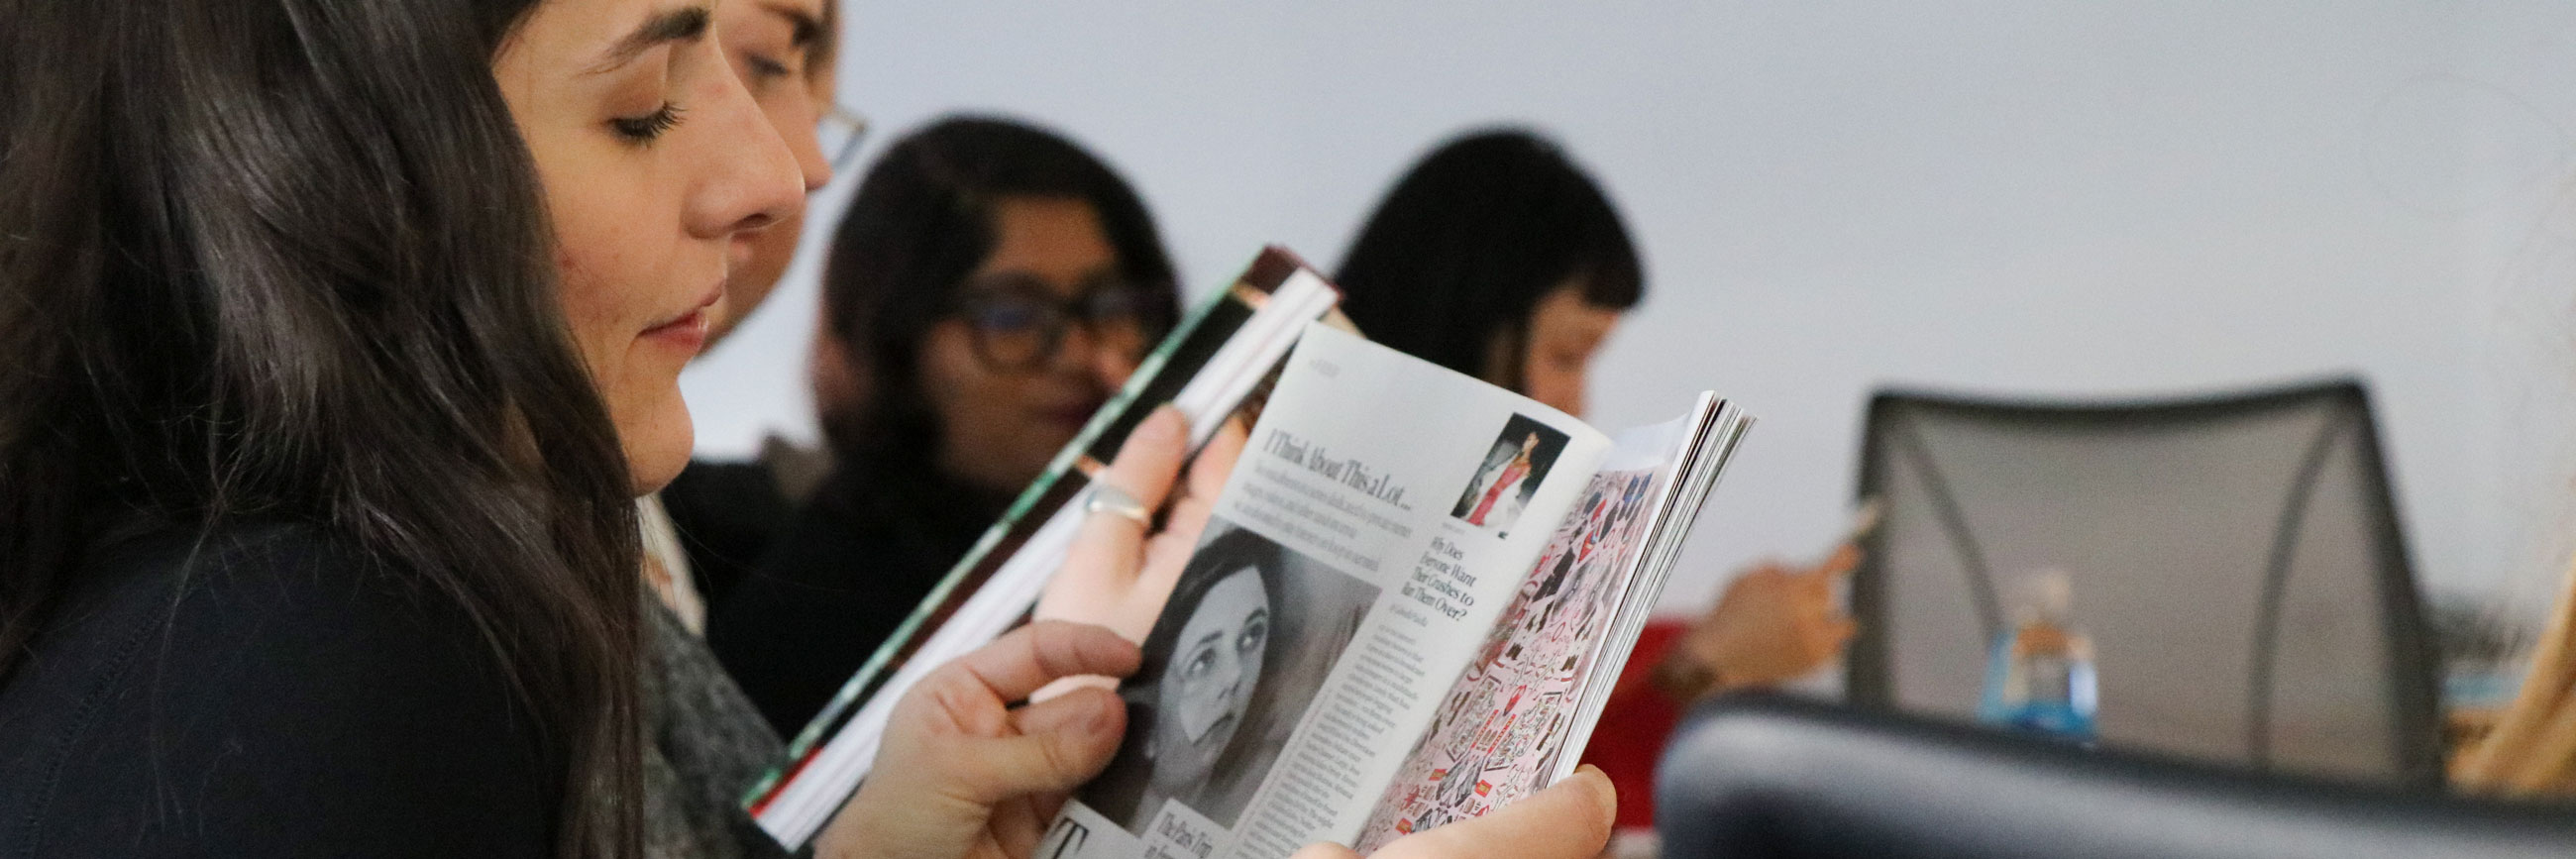 A student reads a magazine